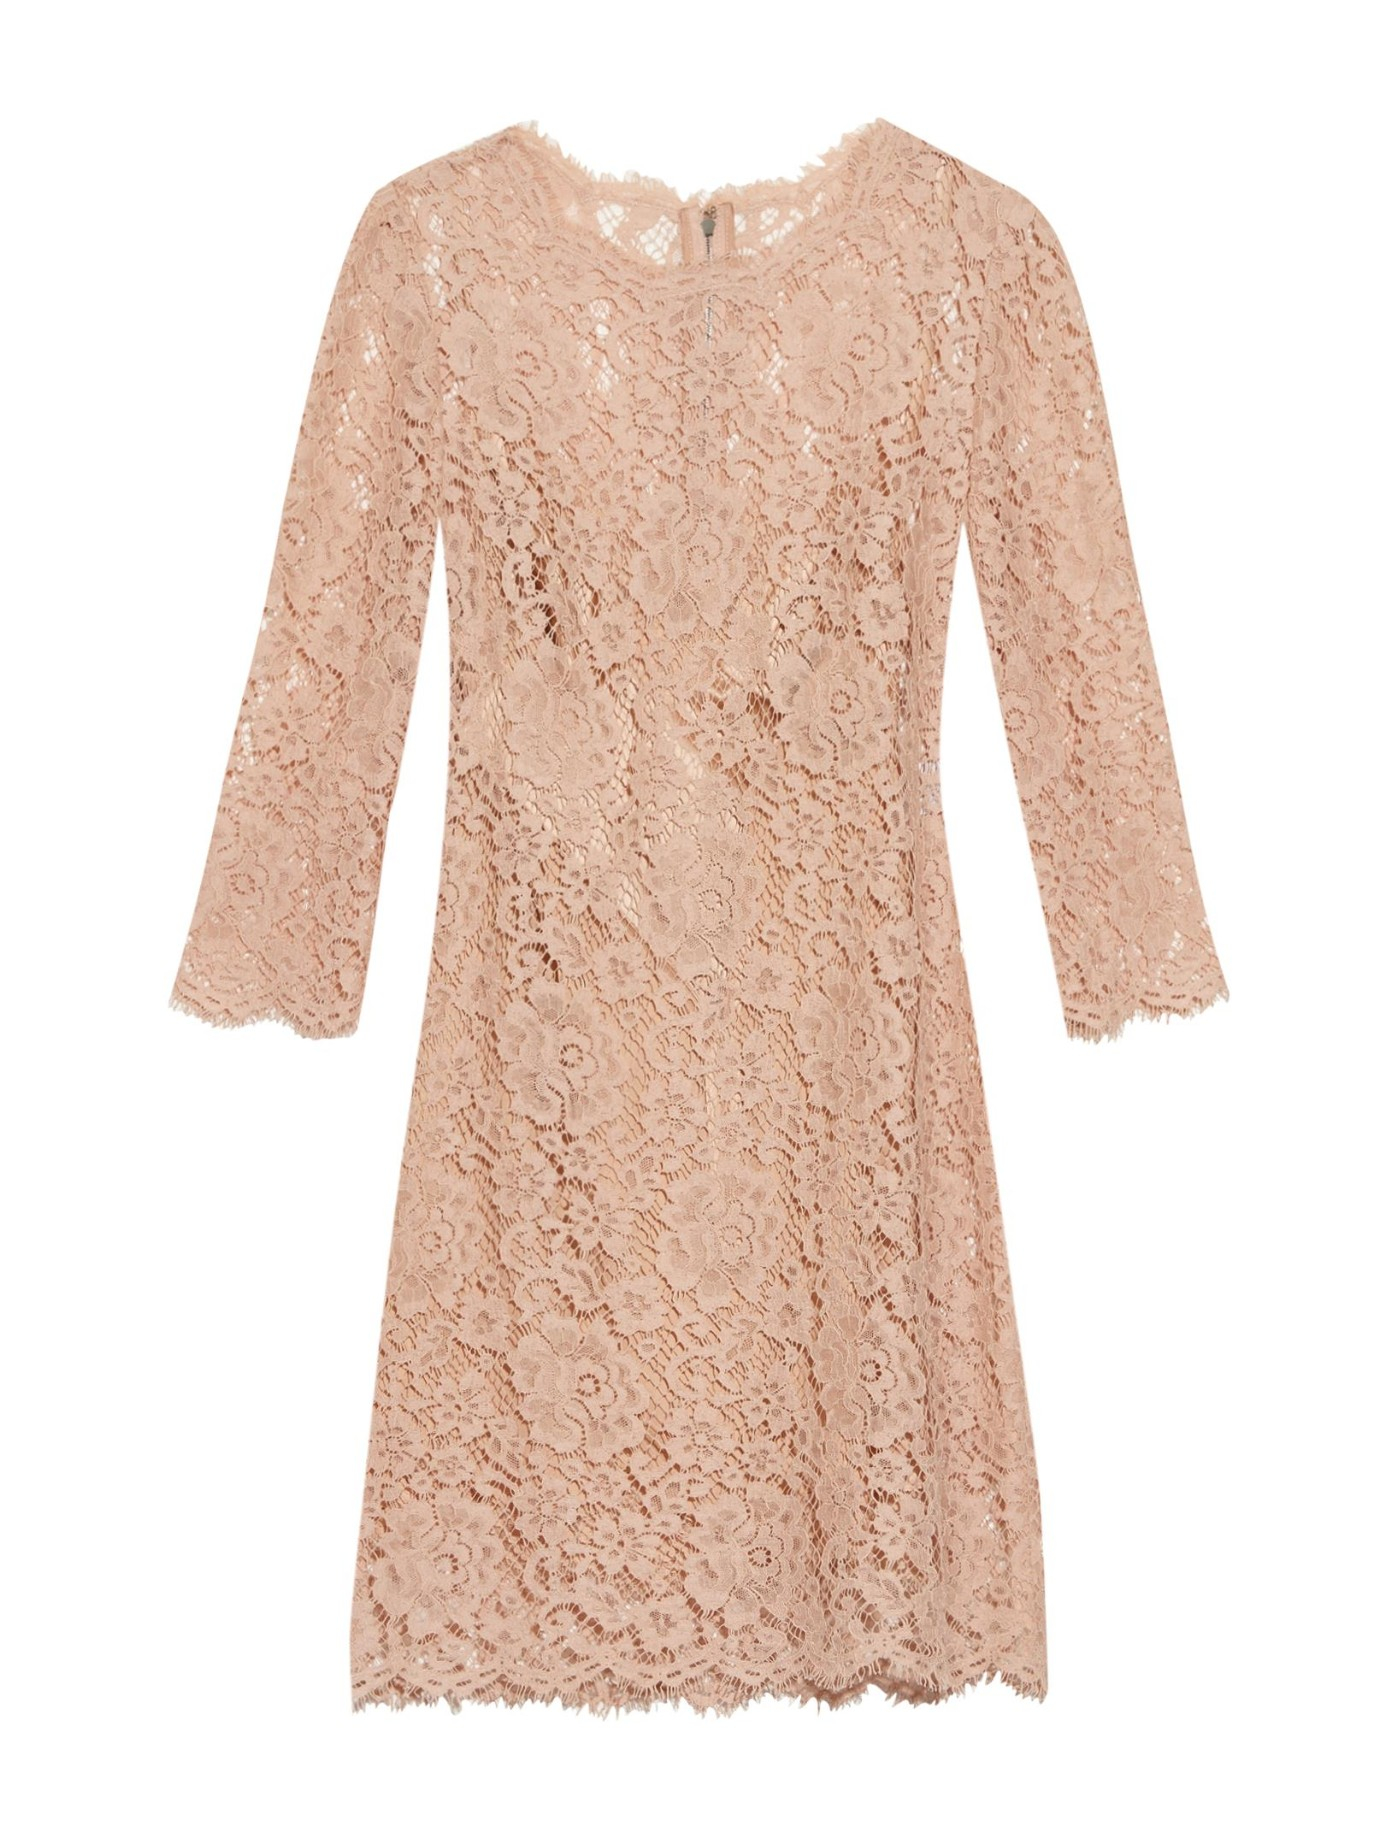 Lyst - Dolce & Gabbana Long-Sleeved Floral-Lace Dress in Pink